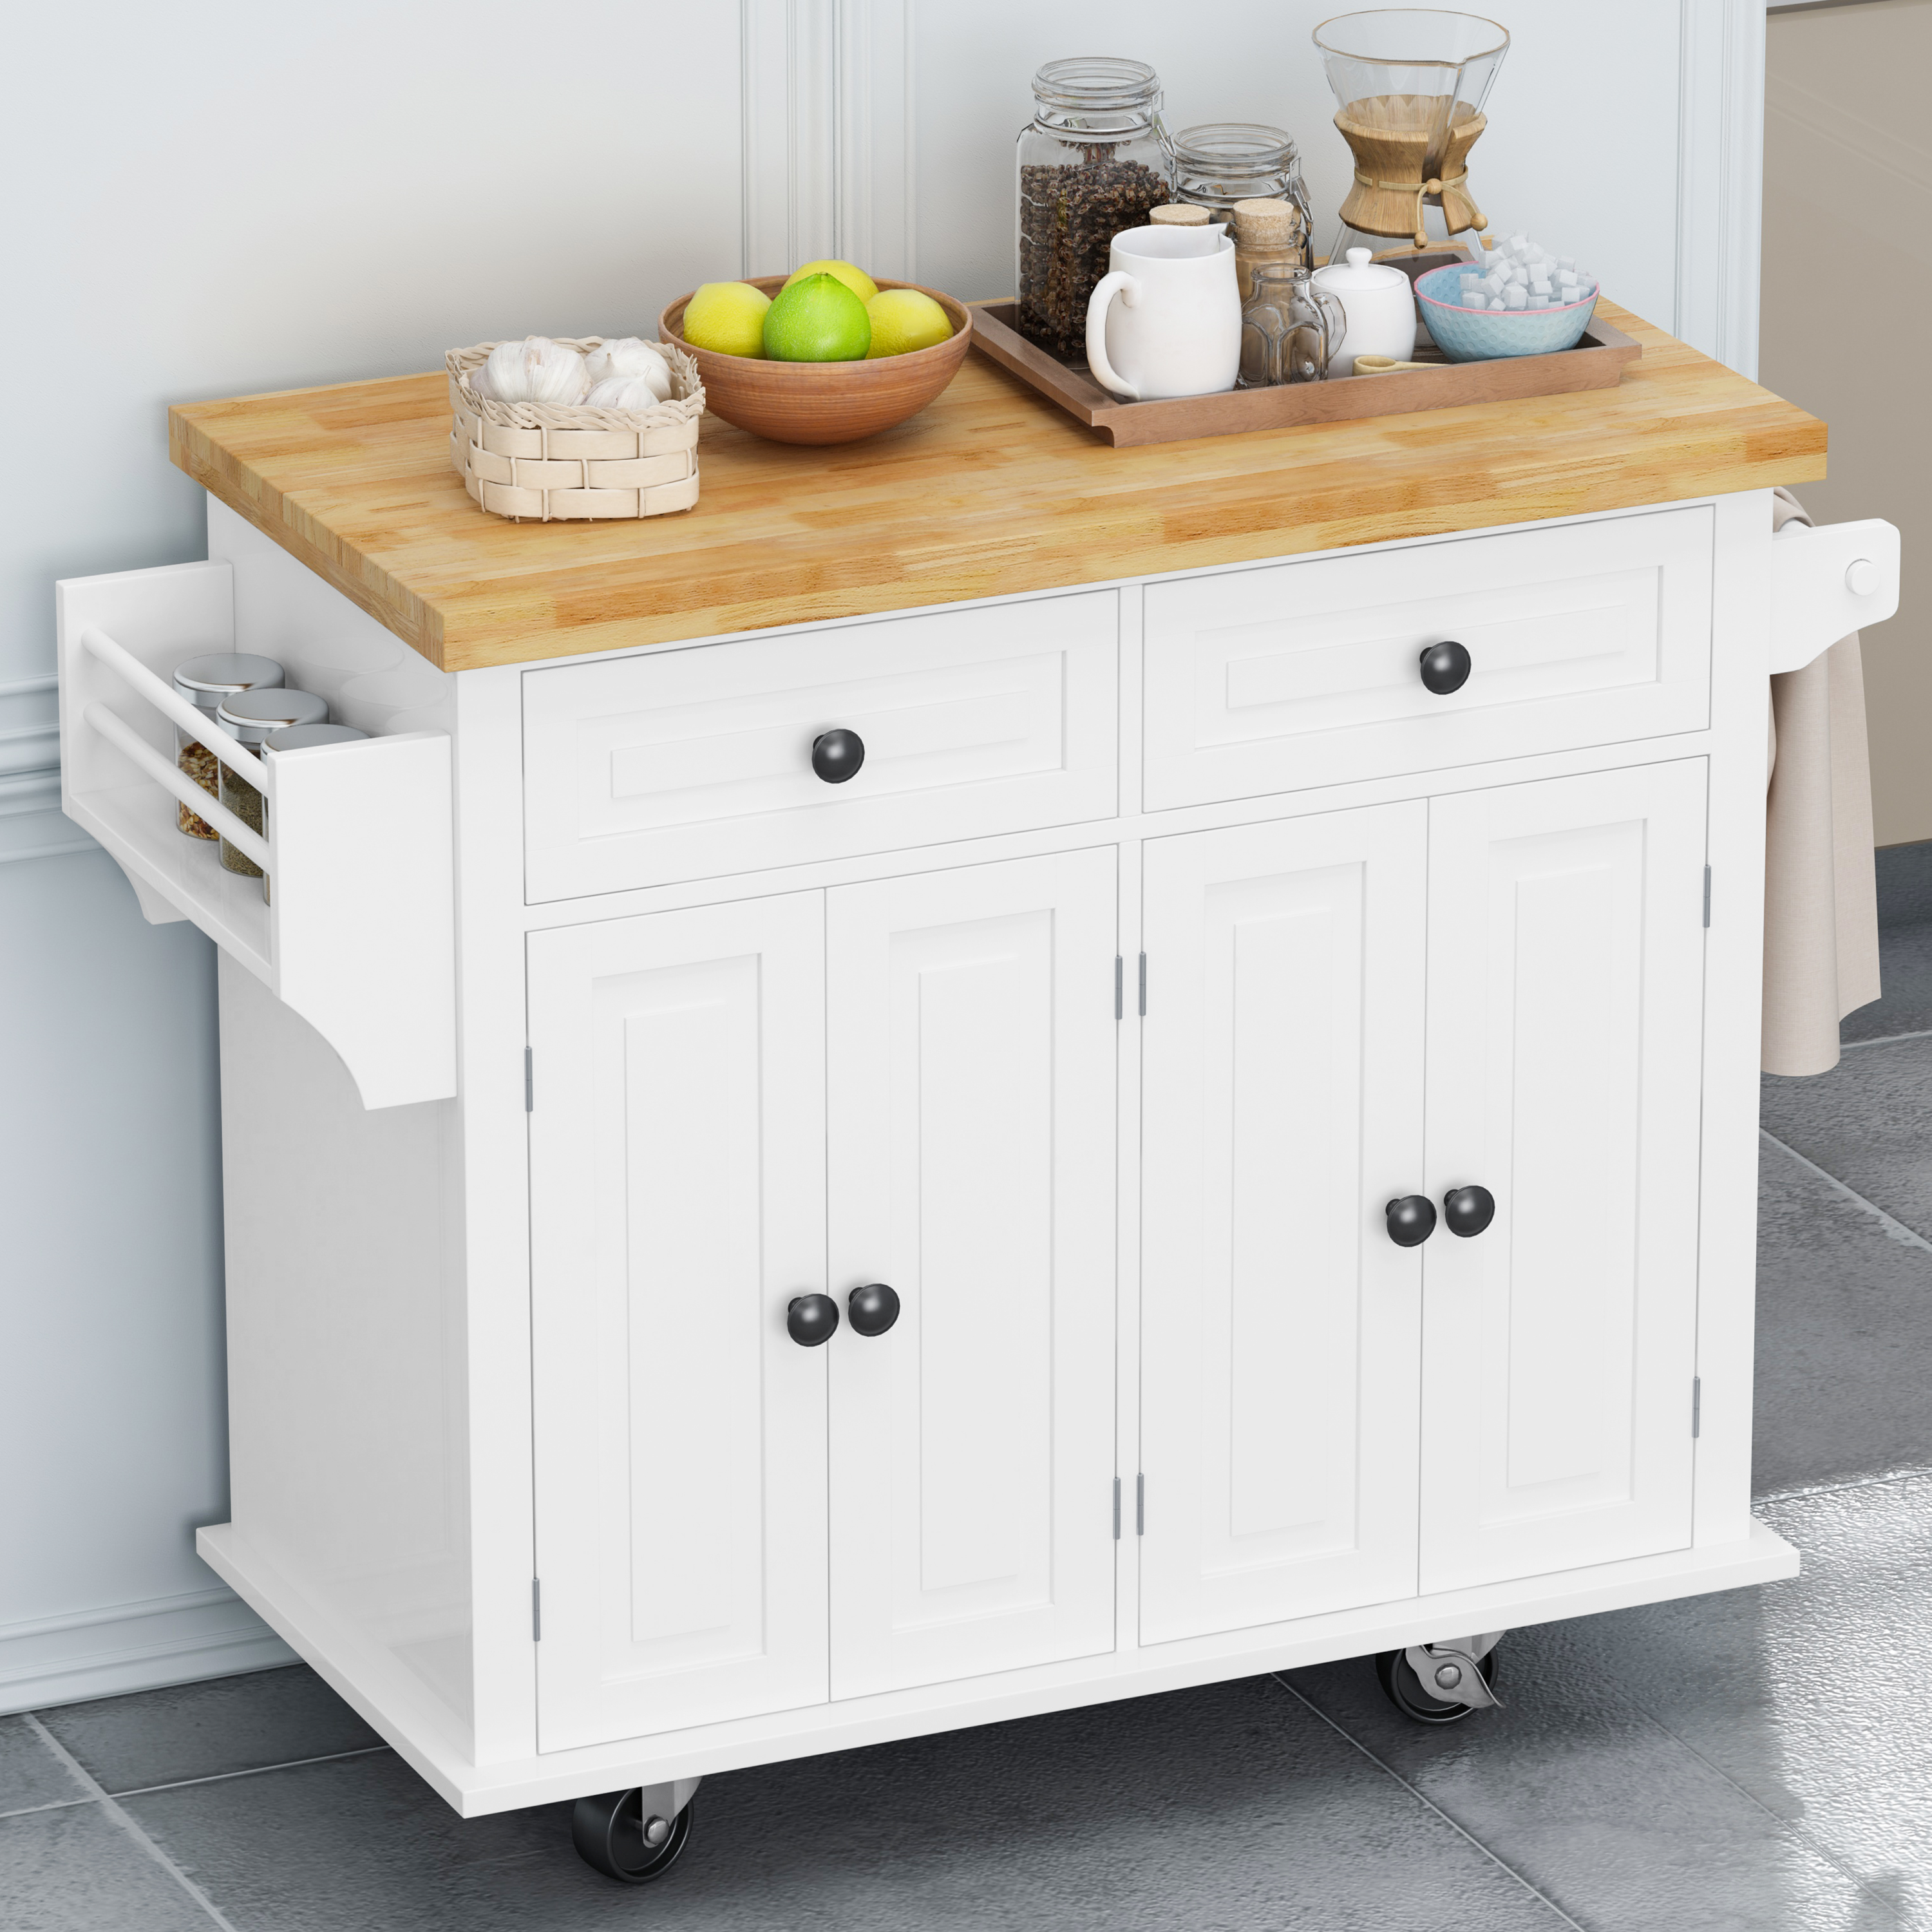 🆓🚛 Kitchen Island Cart With Two Storage Cabinets and Two Locking Wheels, 43.31" Width, 4 Door Cabinet and Two Drawers, Spice Rack, Towel Rack, White